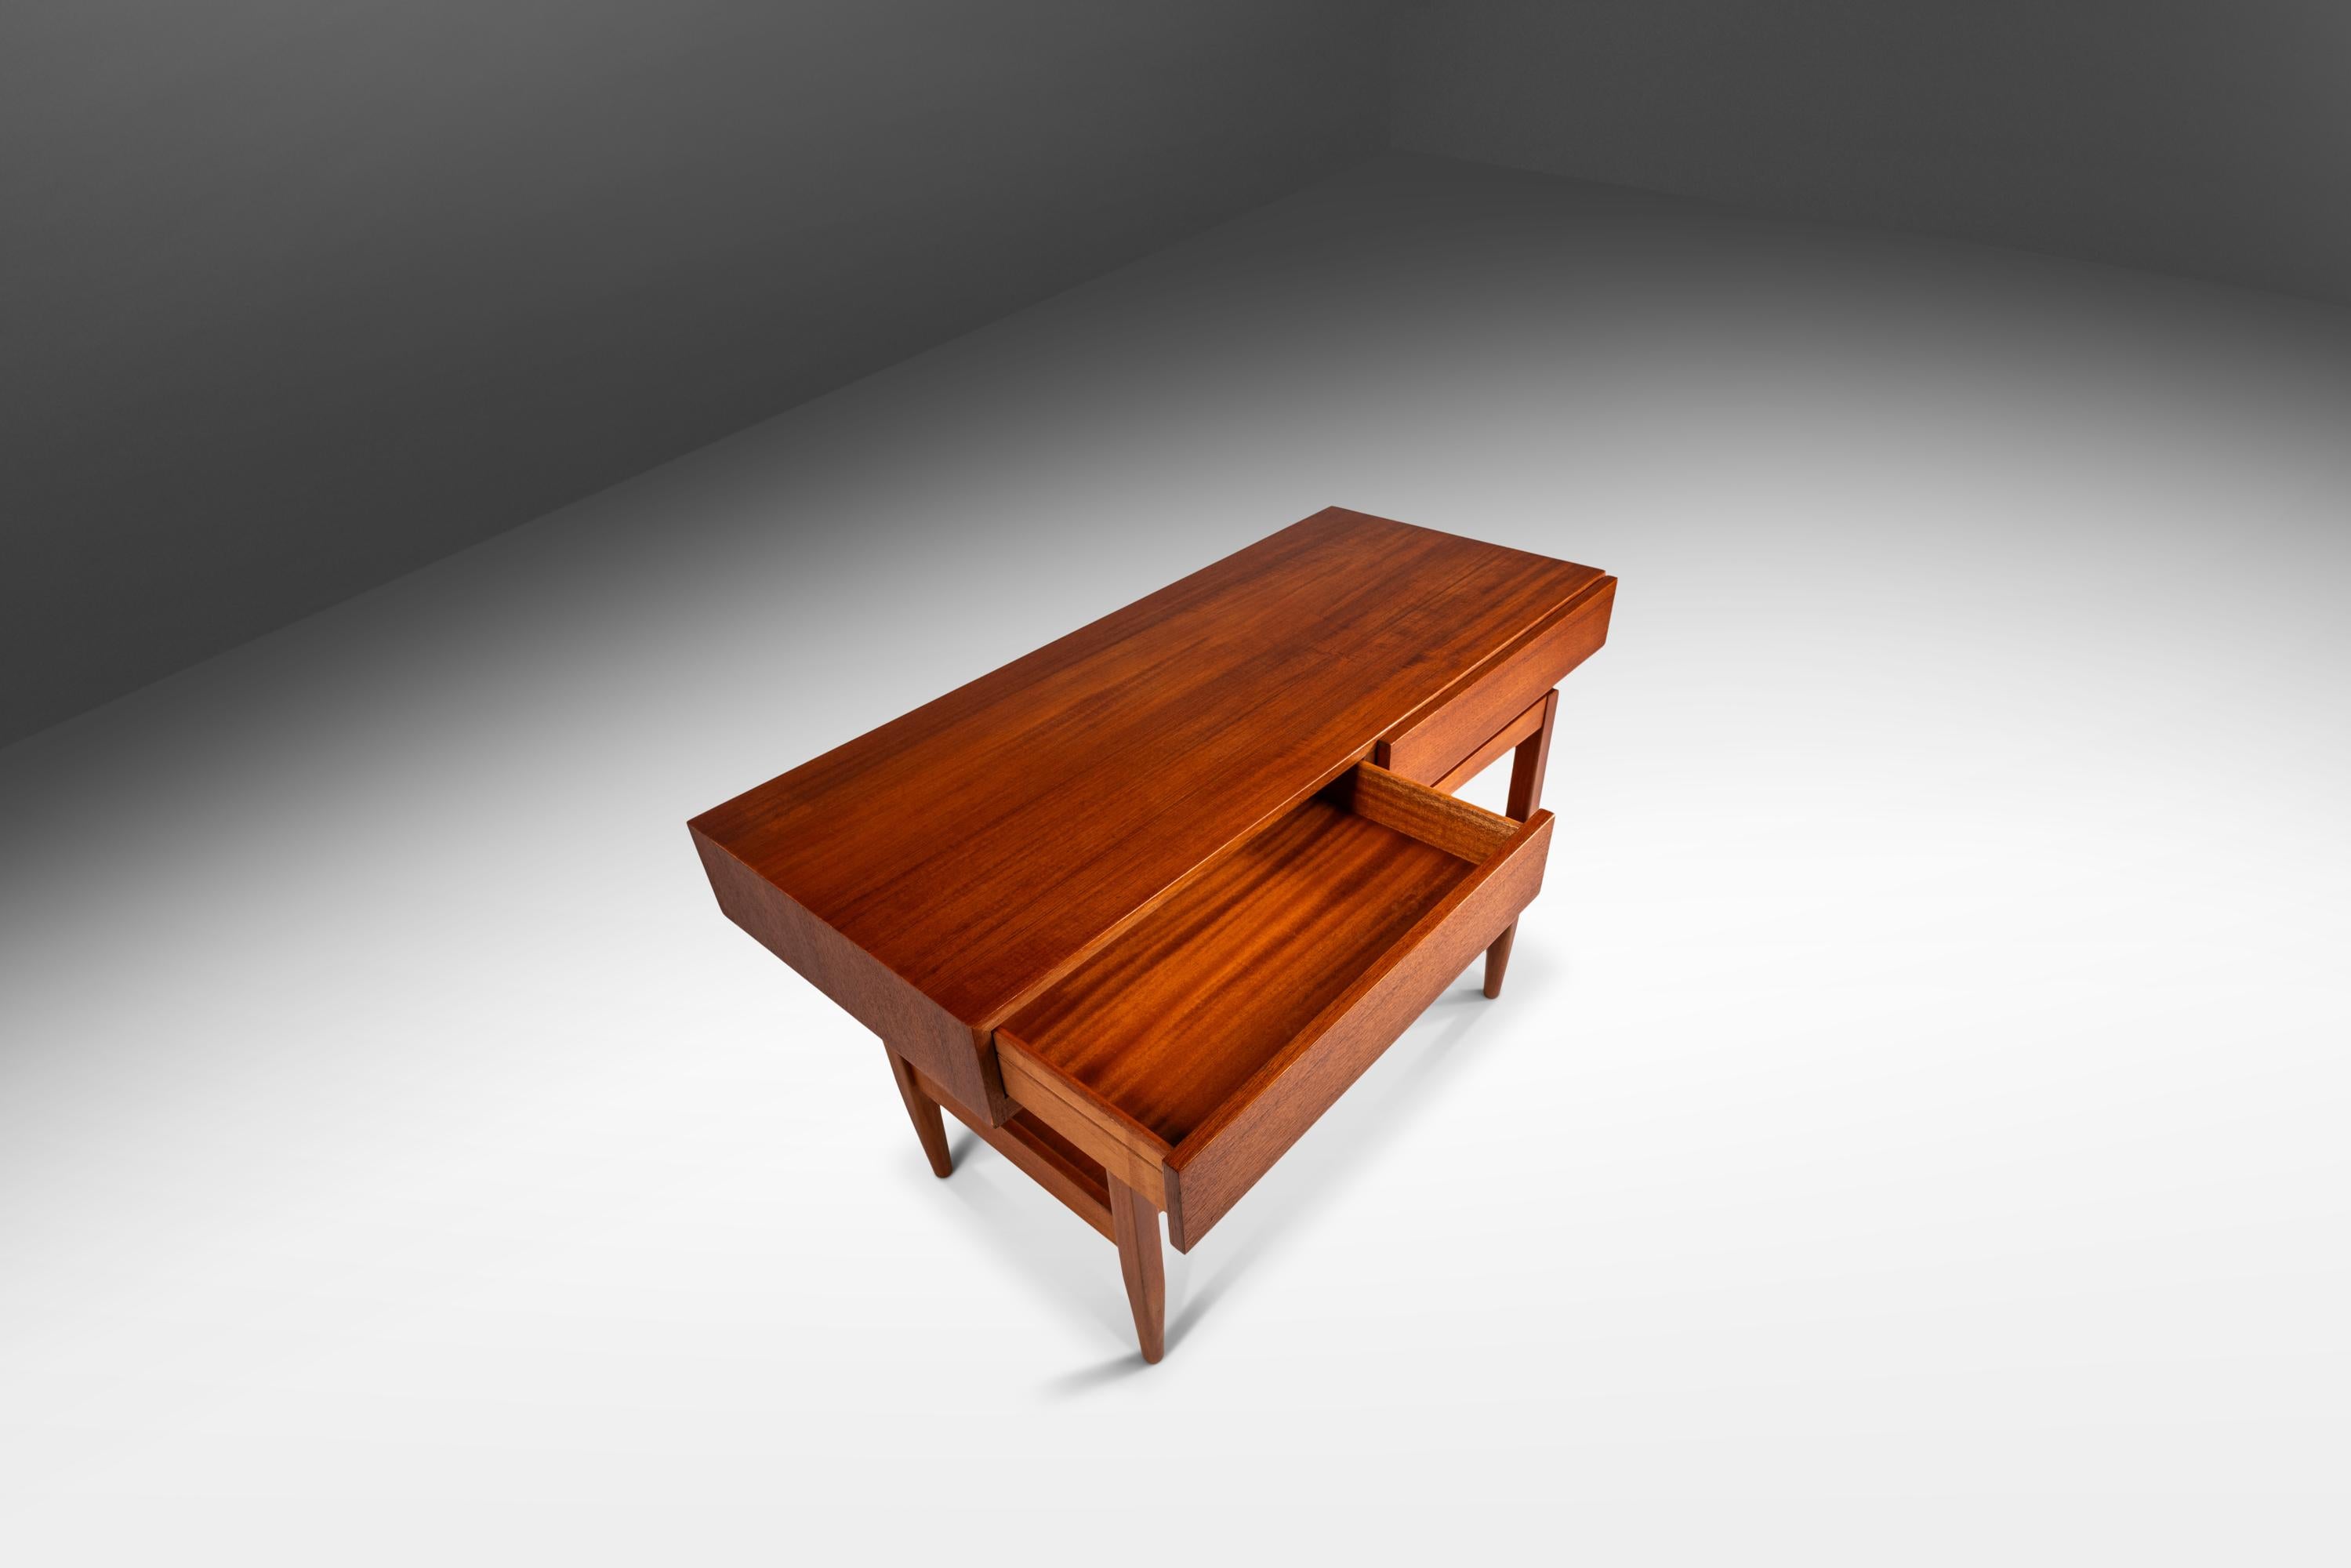 Introducing a true Danish Modern masterpiece: a rare teak console table designed by the incomparable Ib Kofod Larsen for Faarup Møbelfabrik. This iconic table has been fully restored and refinished making it the perfect addition to any modern home.